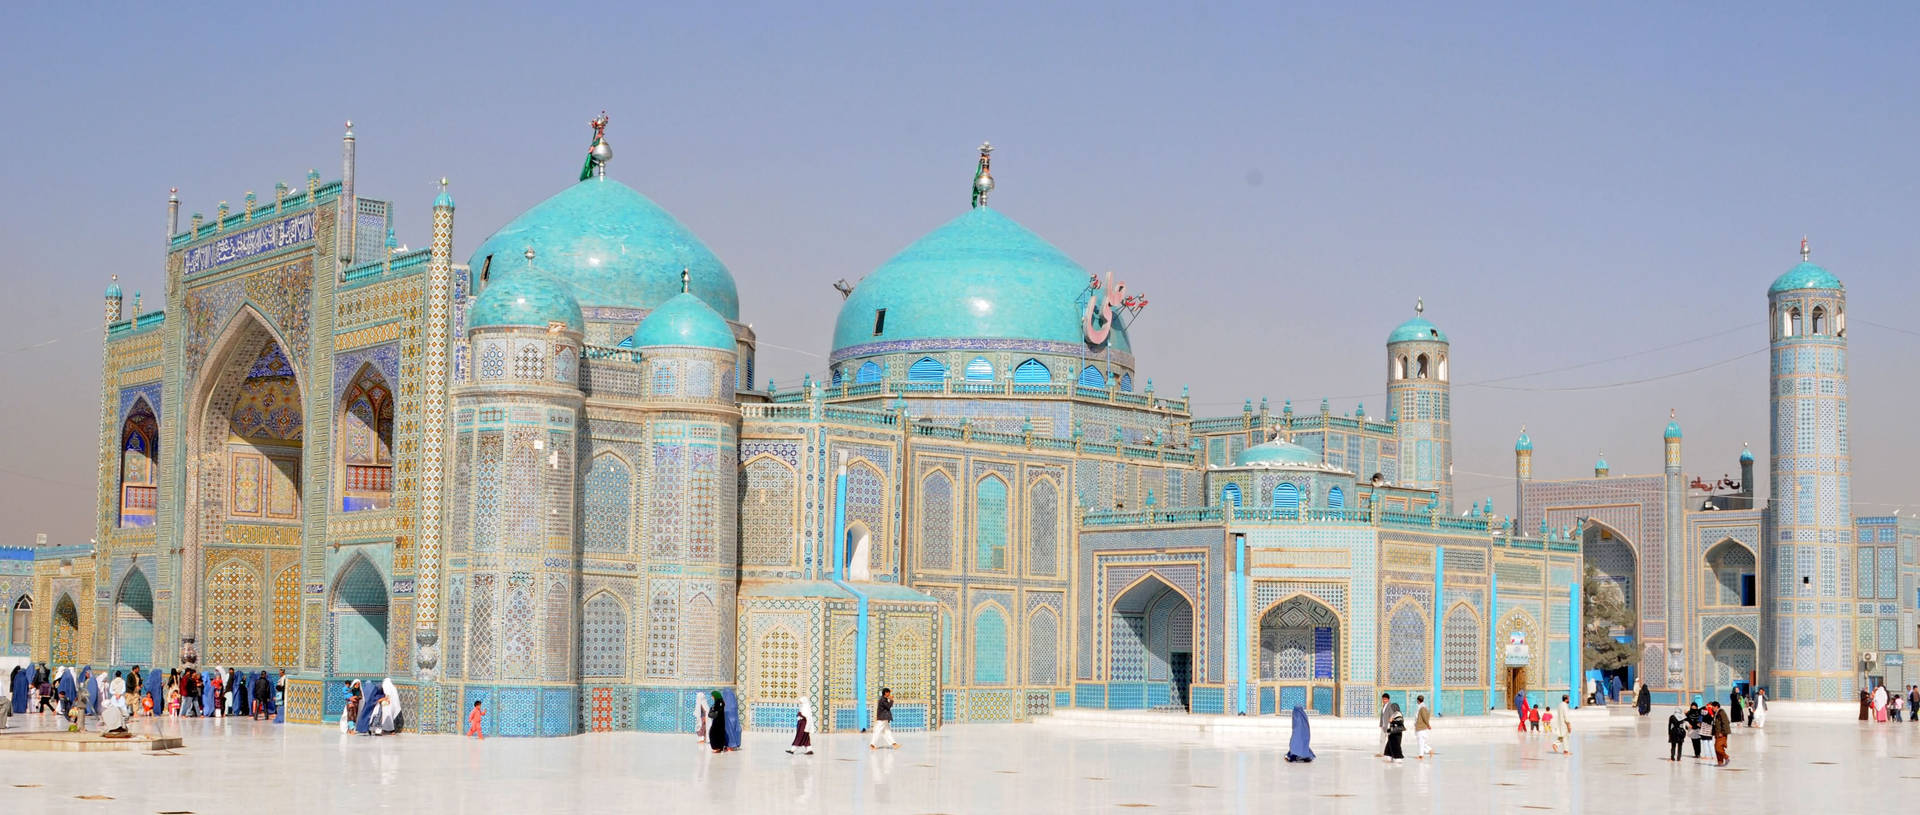 Majestic View Of The Stunning Blue Mosque In Afghanistan